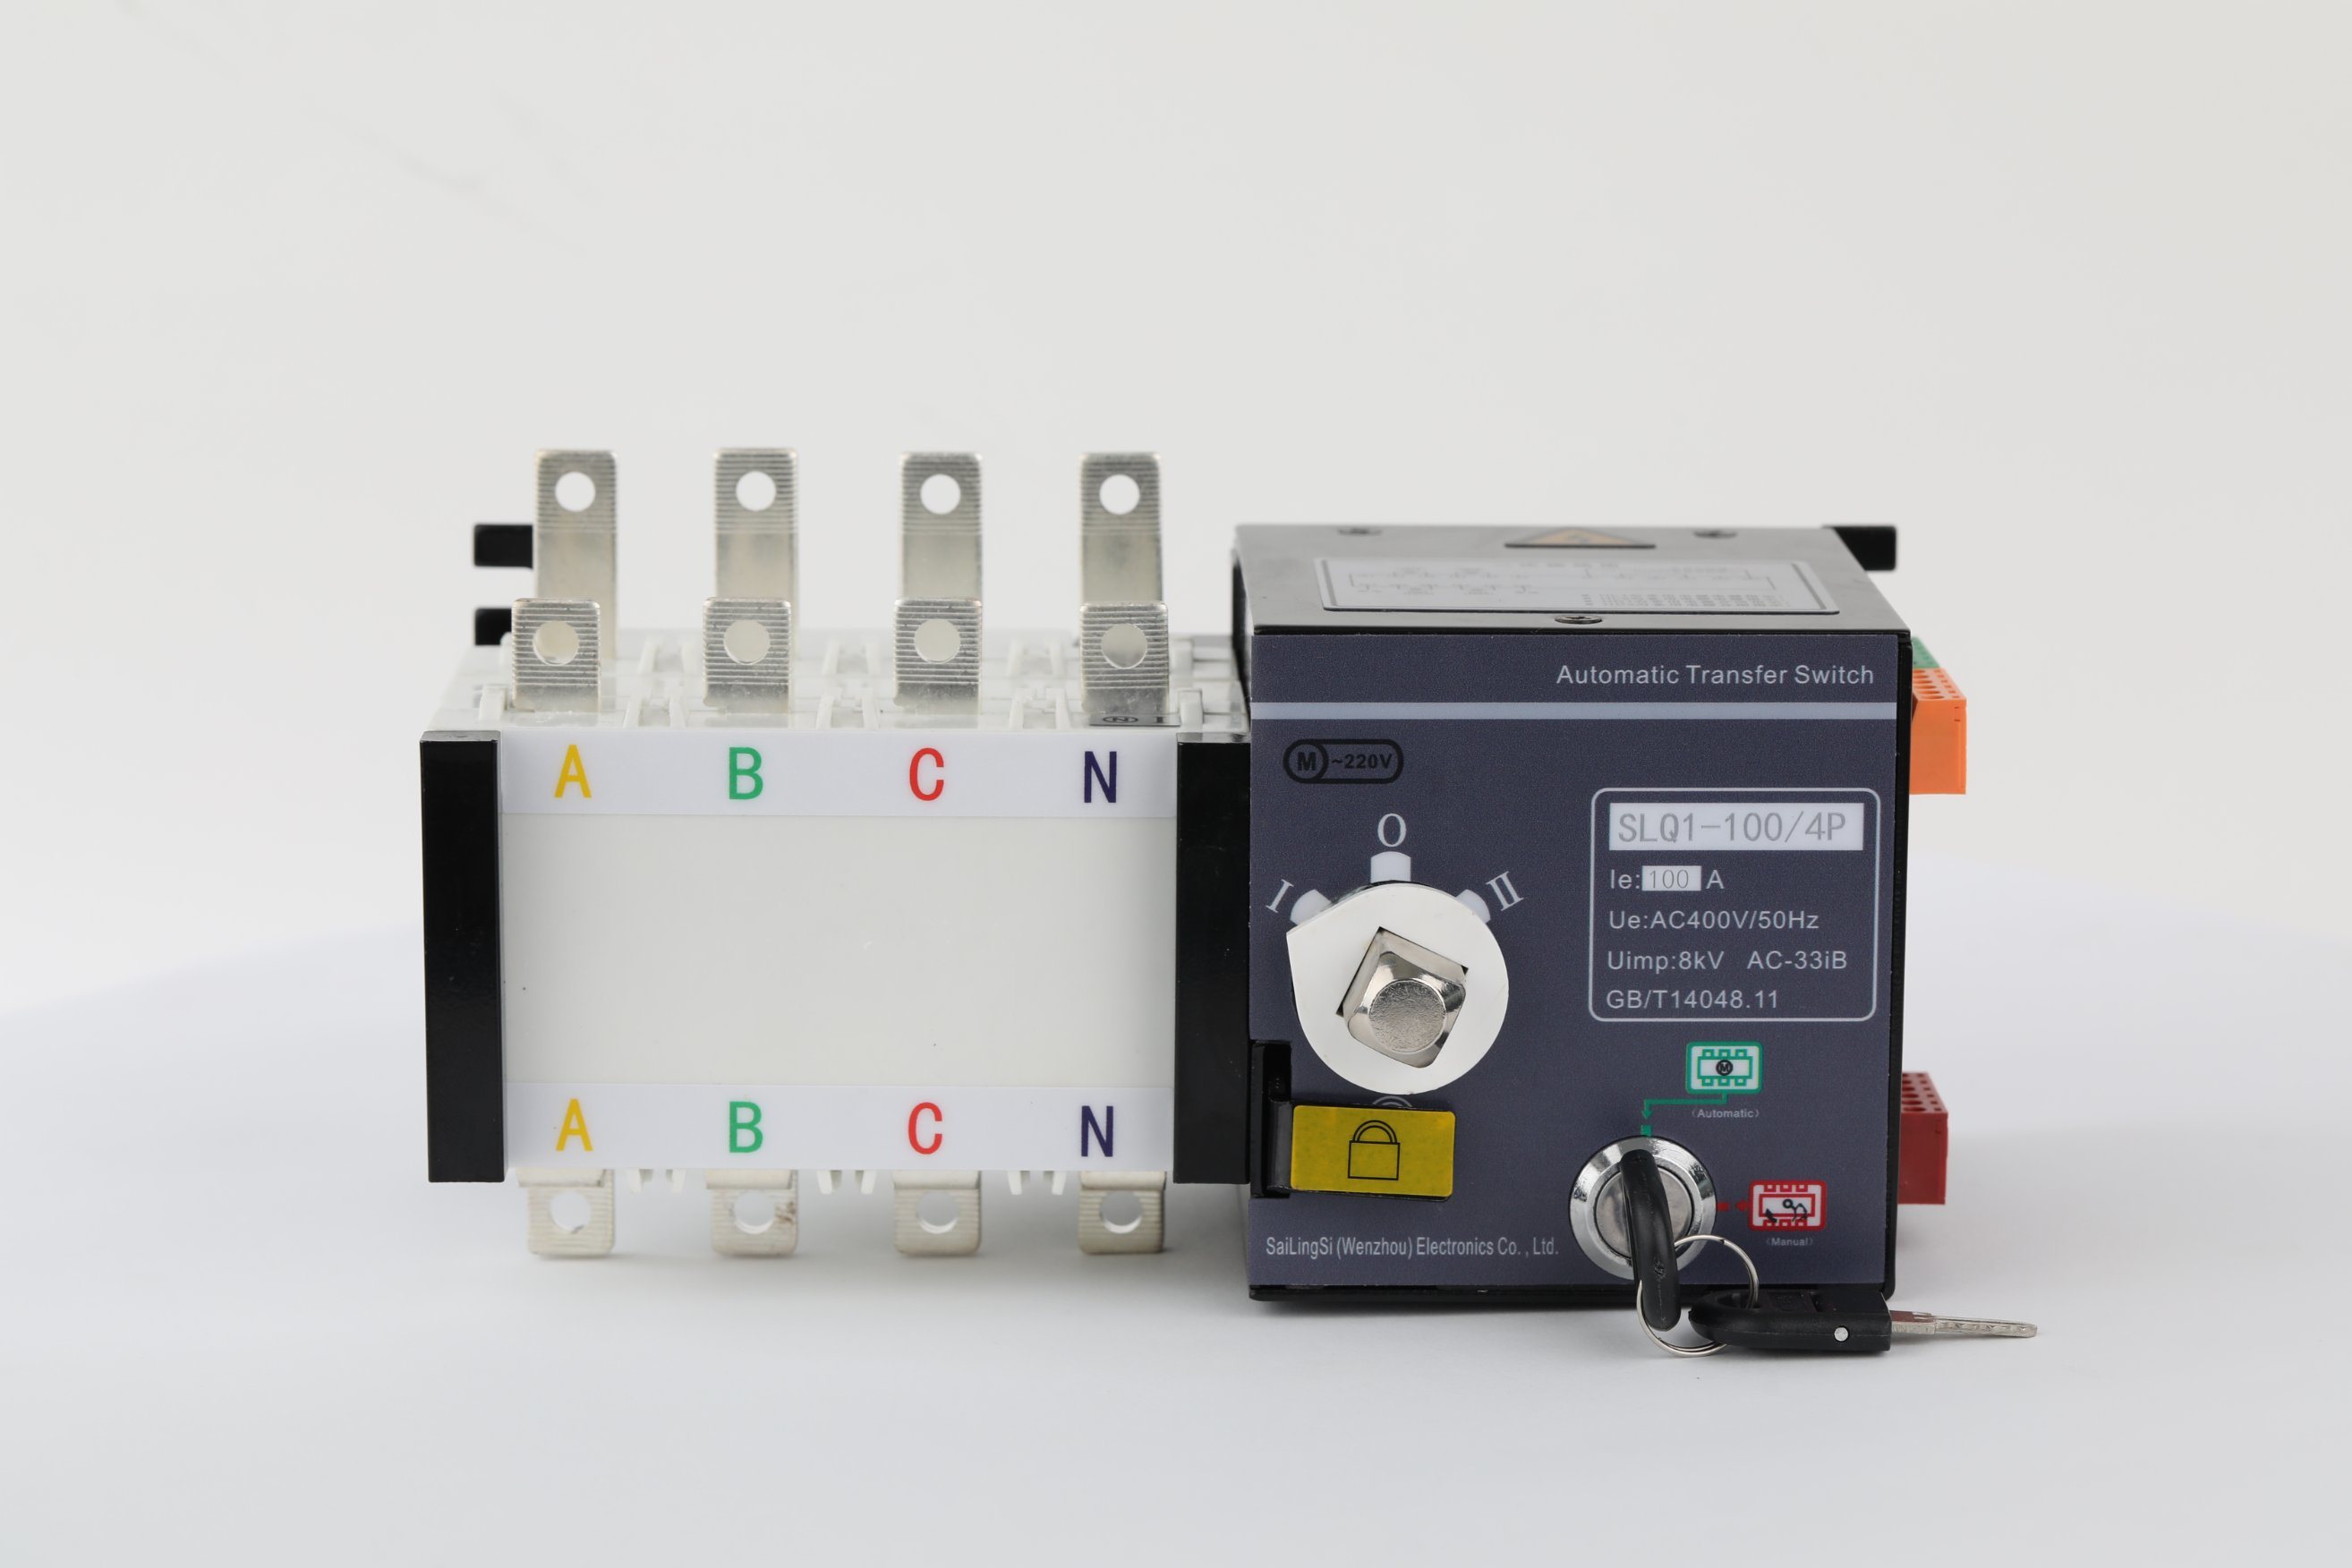 Uvq1-1000A 4p ATS 400V 50Hz ATS Self Return Electric Automatic Transfer Switch with Fire Control